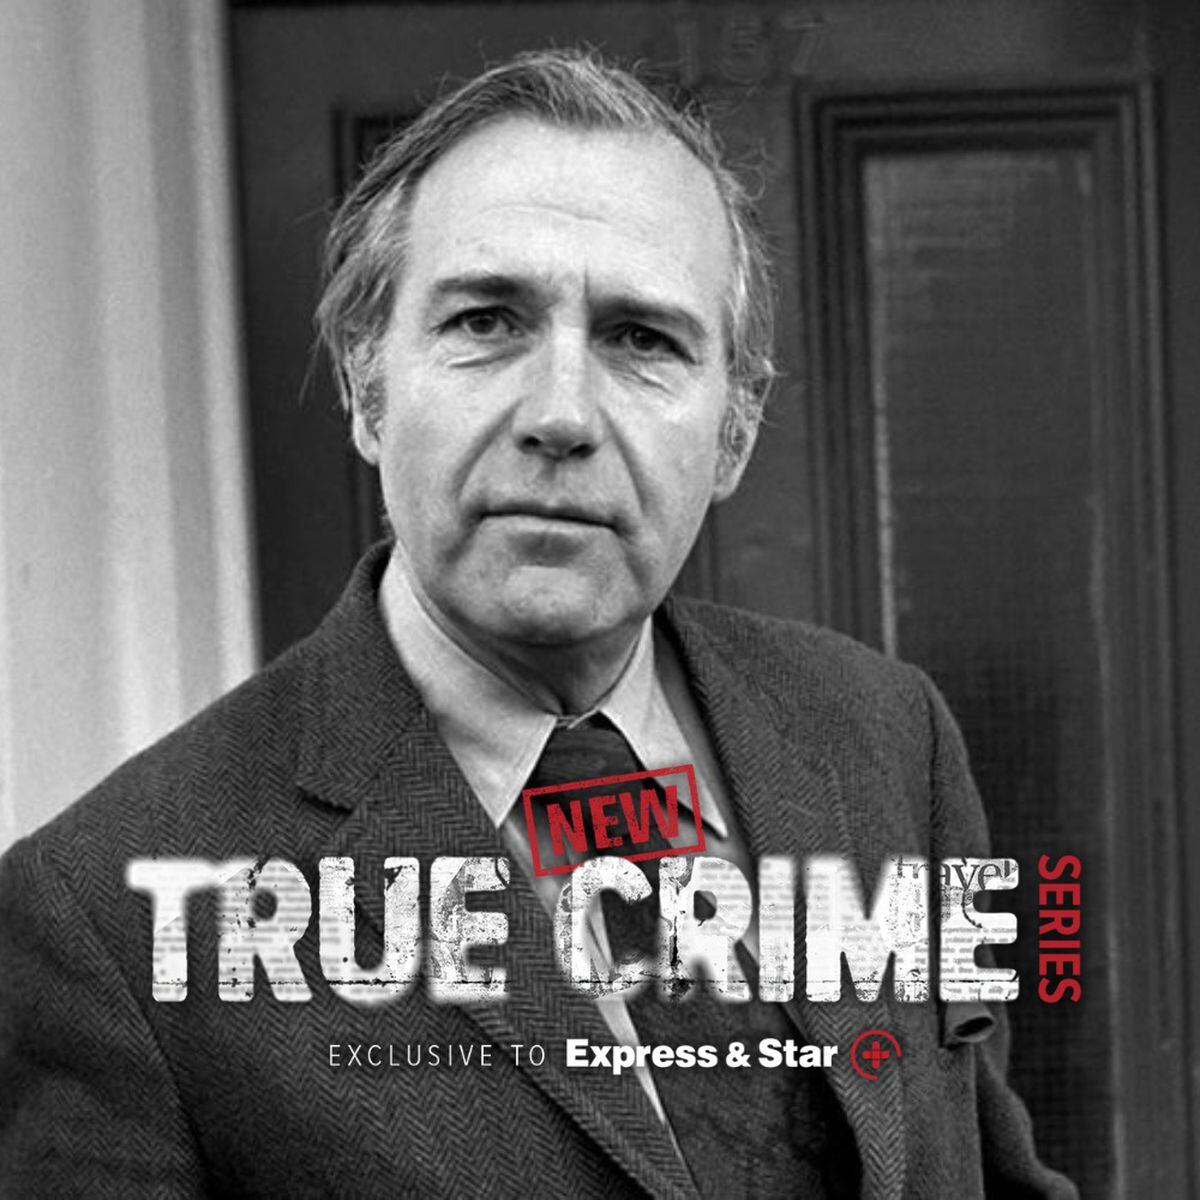 John Stonehouse features in our upcoming true crime long-reads and podcasts series for Express & Star+ subscribers